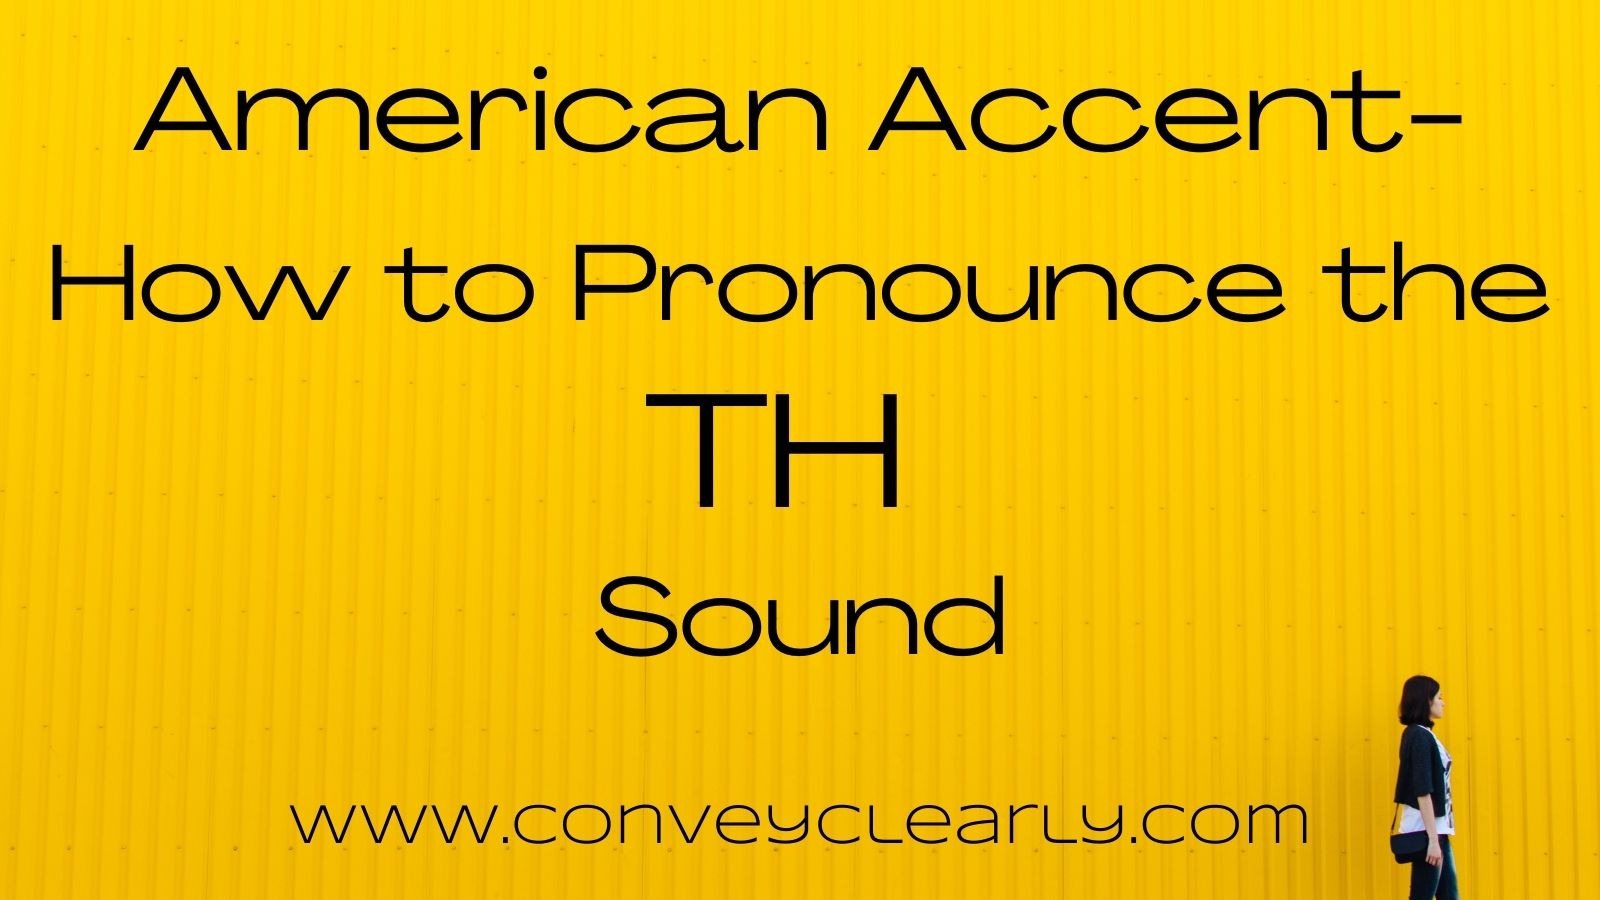 American Accent–Pronouncing the Dreaded TH